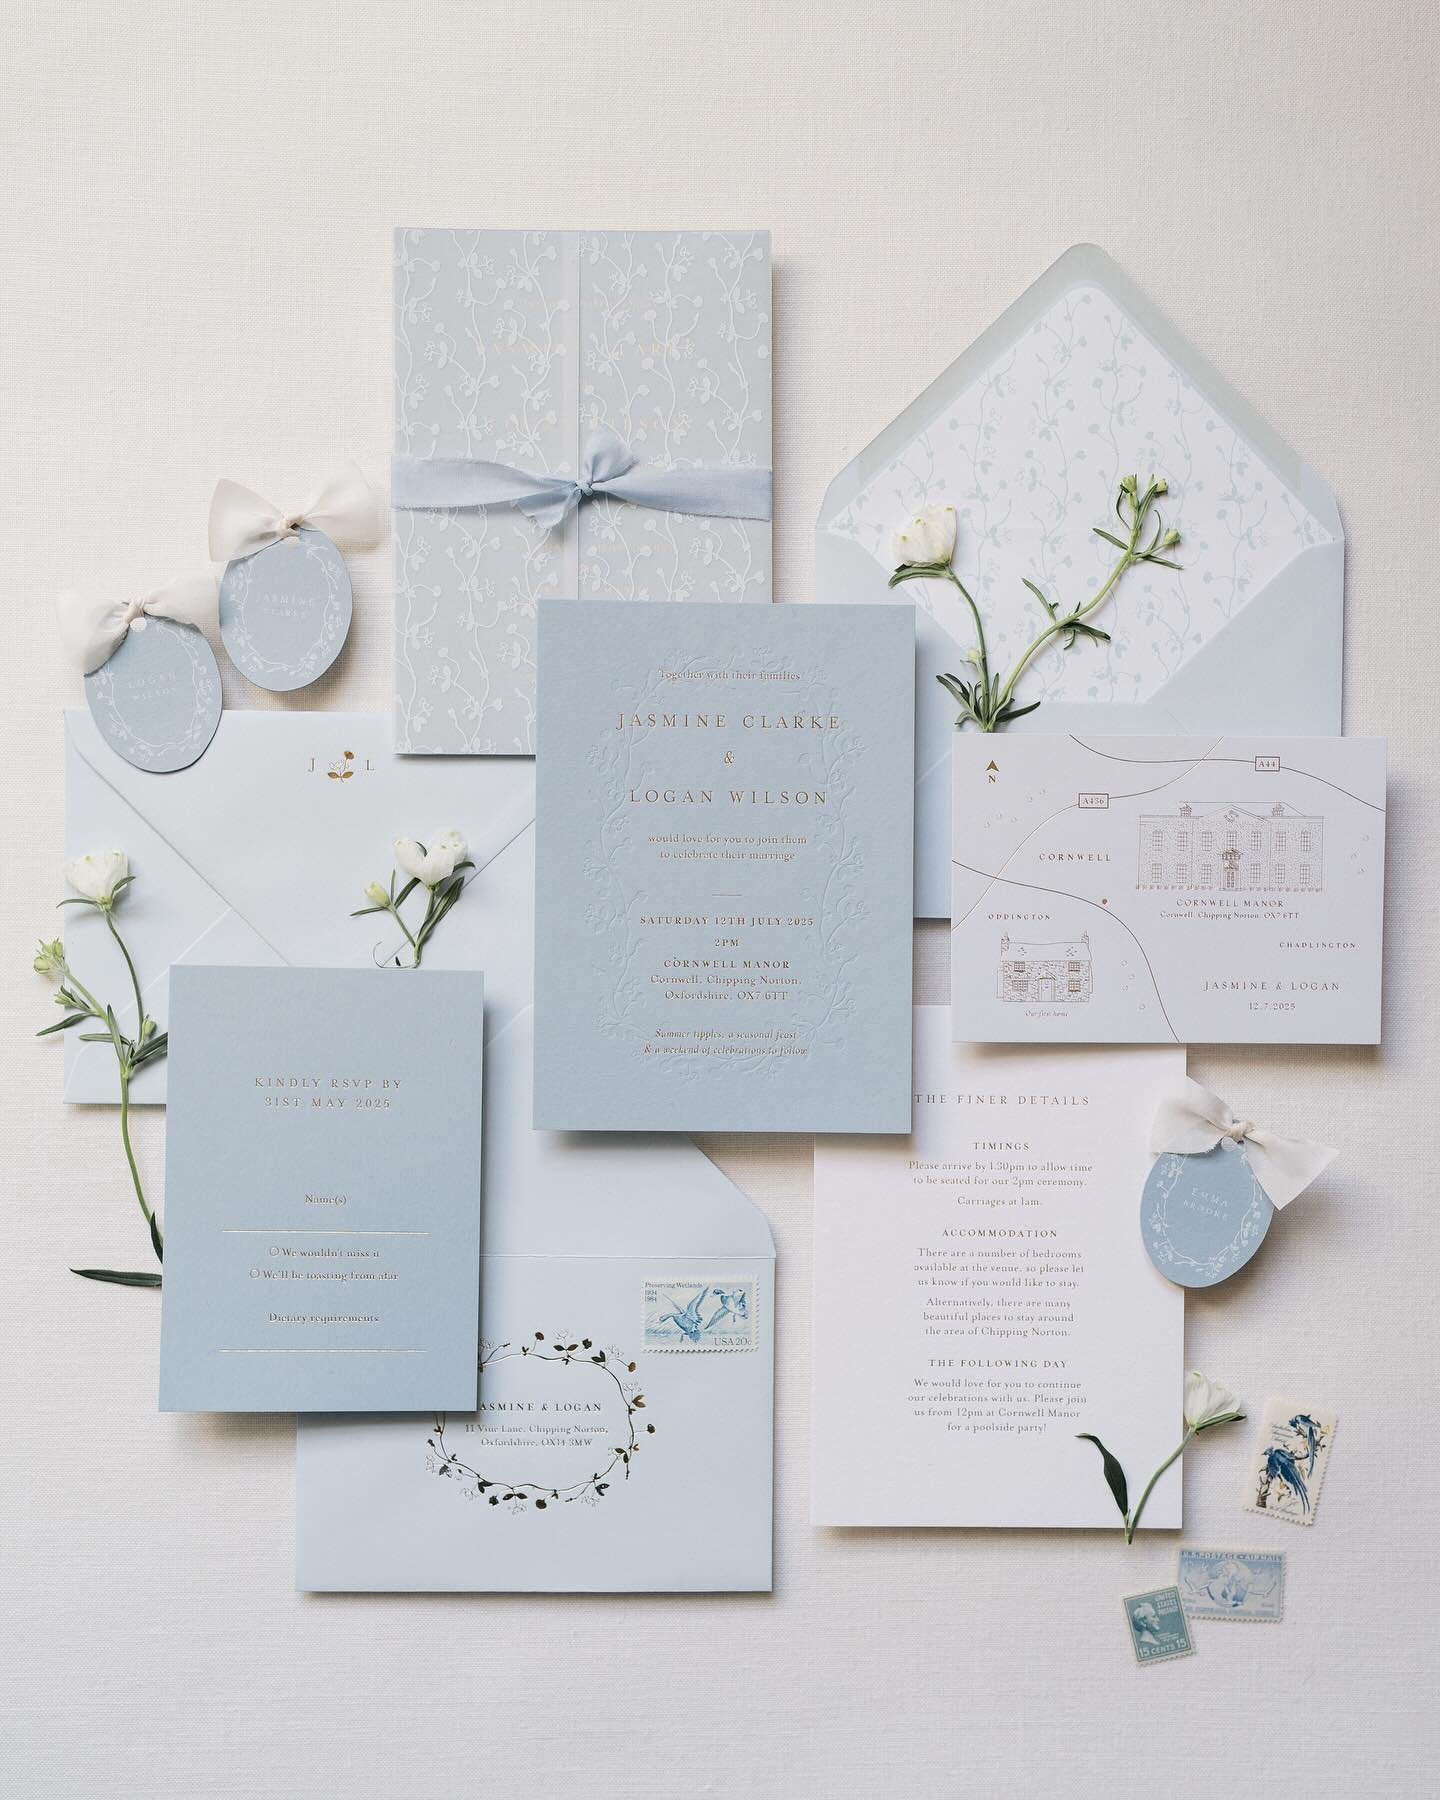 Delicious tones of blue at Cornwell Manor in the Cotswolds earlier this month 💙 We used Frances as the stationery collection and customised the colour palette to perfectly set the tone of this beautiful day through the invitation suite and table sta